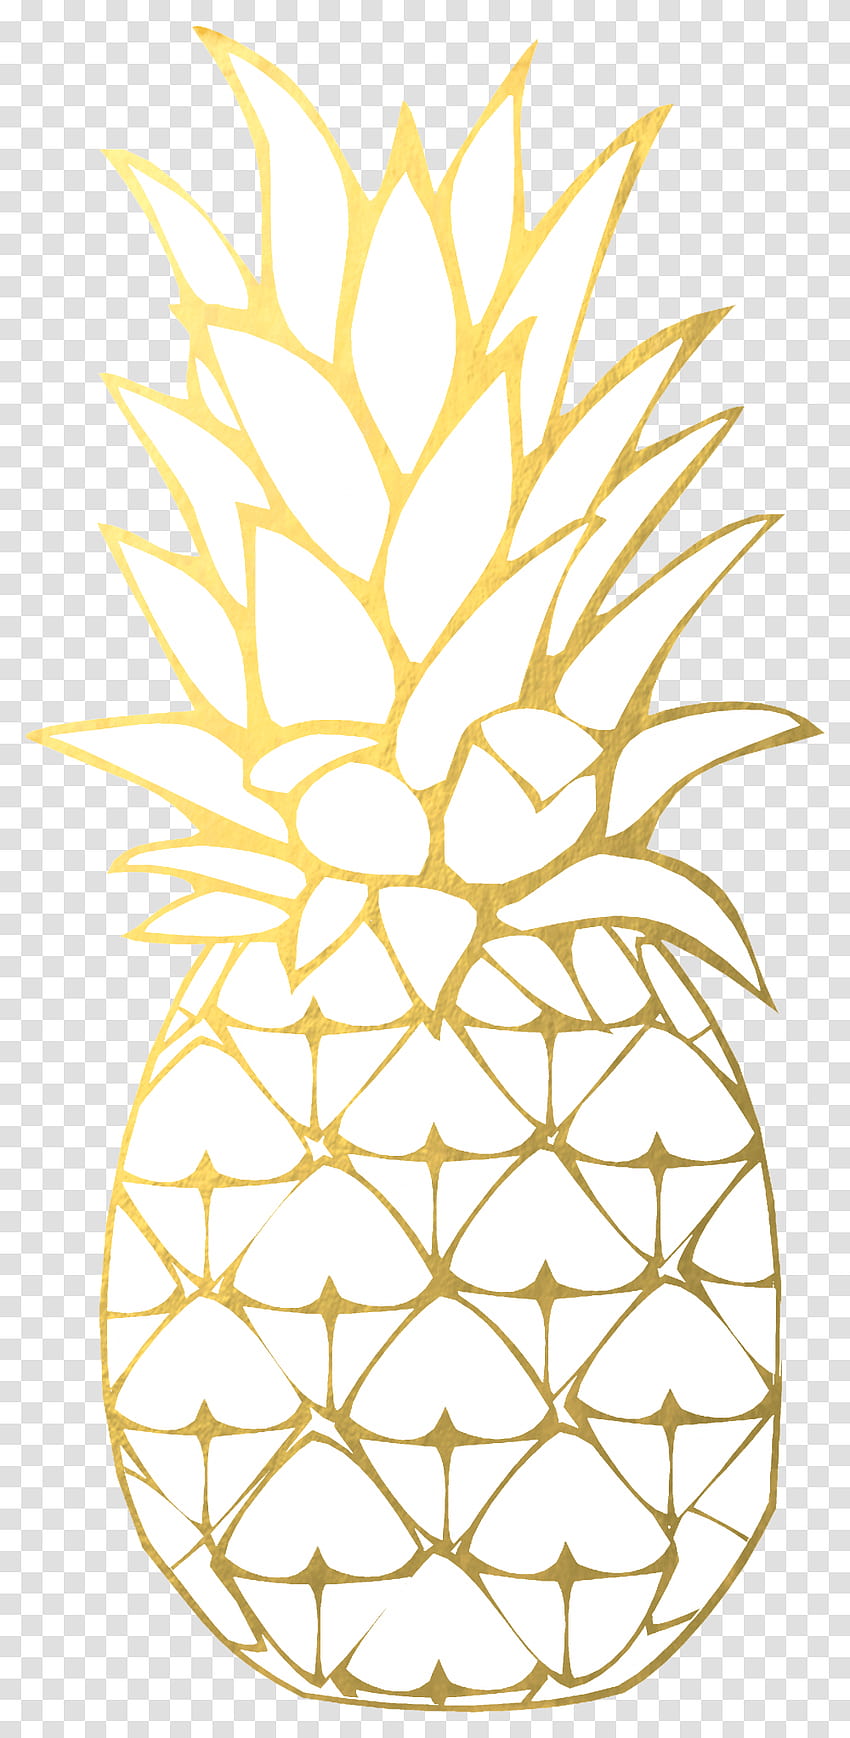 Pineapple Clipart Gold Pineapple Backgrounds Gold Pineapple, Fruit, Plant, Food Transparent Png – Pngset HD phone wallpaper